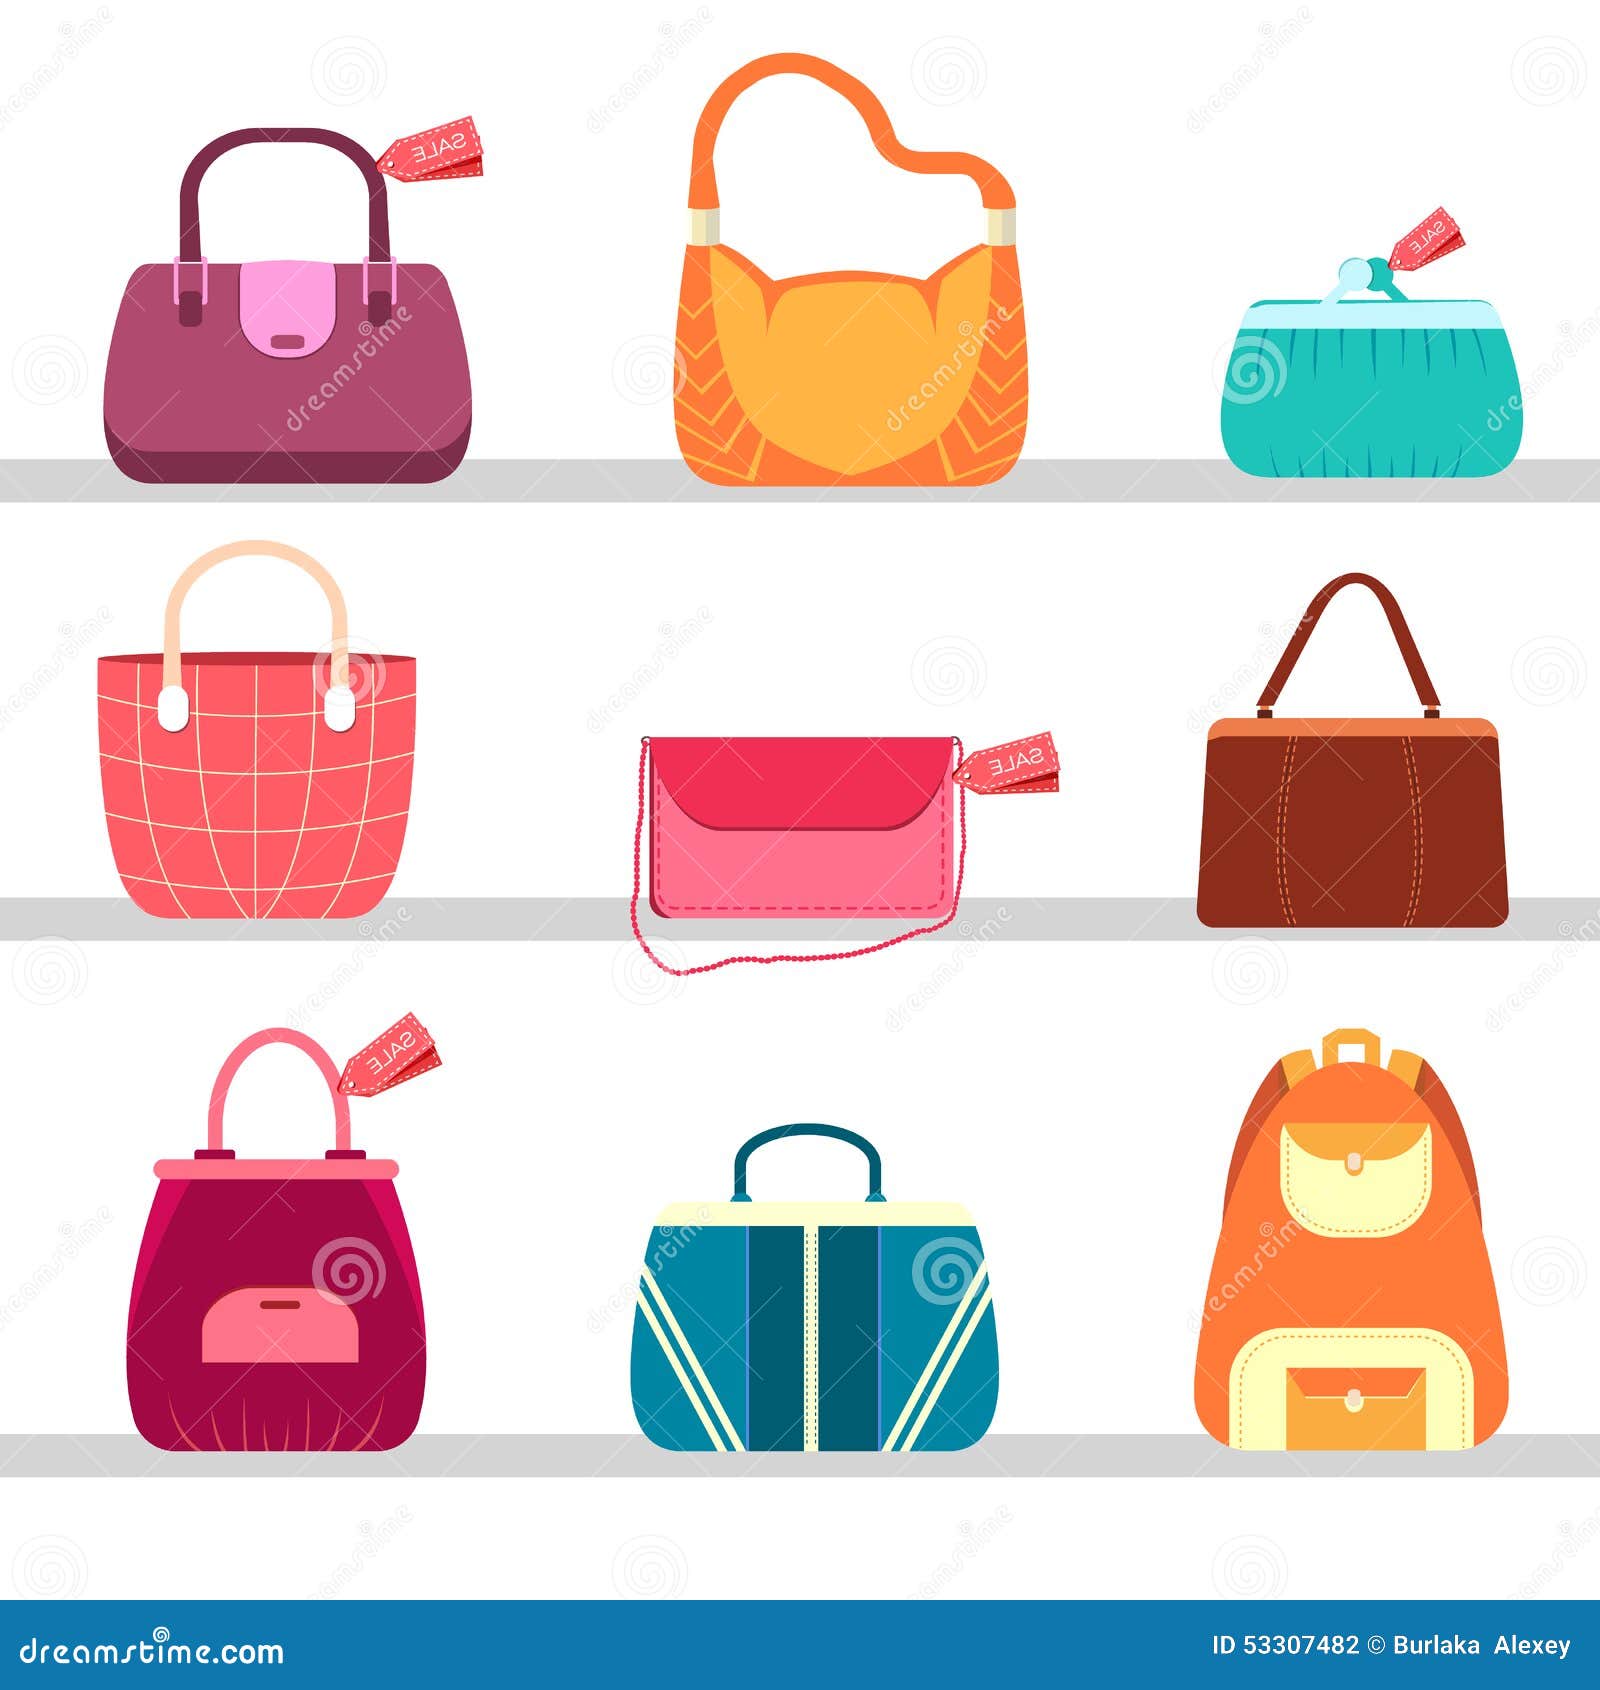 Elegance Fashion Handbags and Bags in Flat Stock Vector - Illustration ...